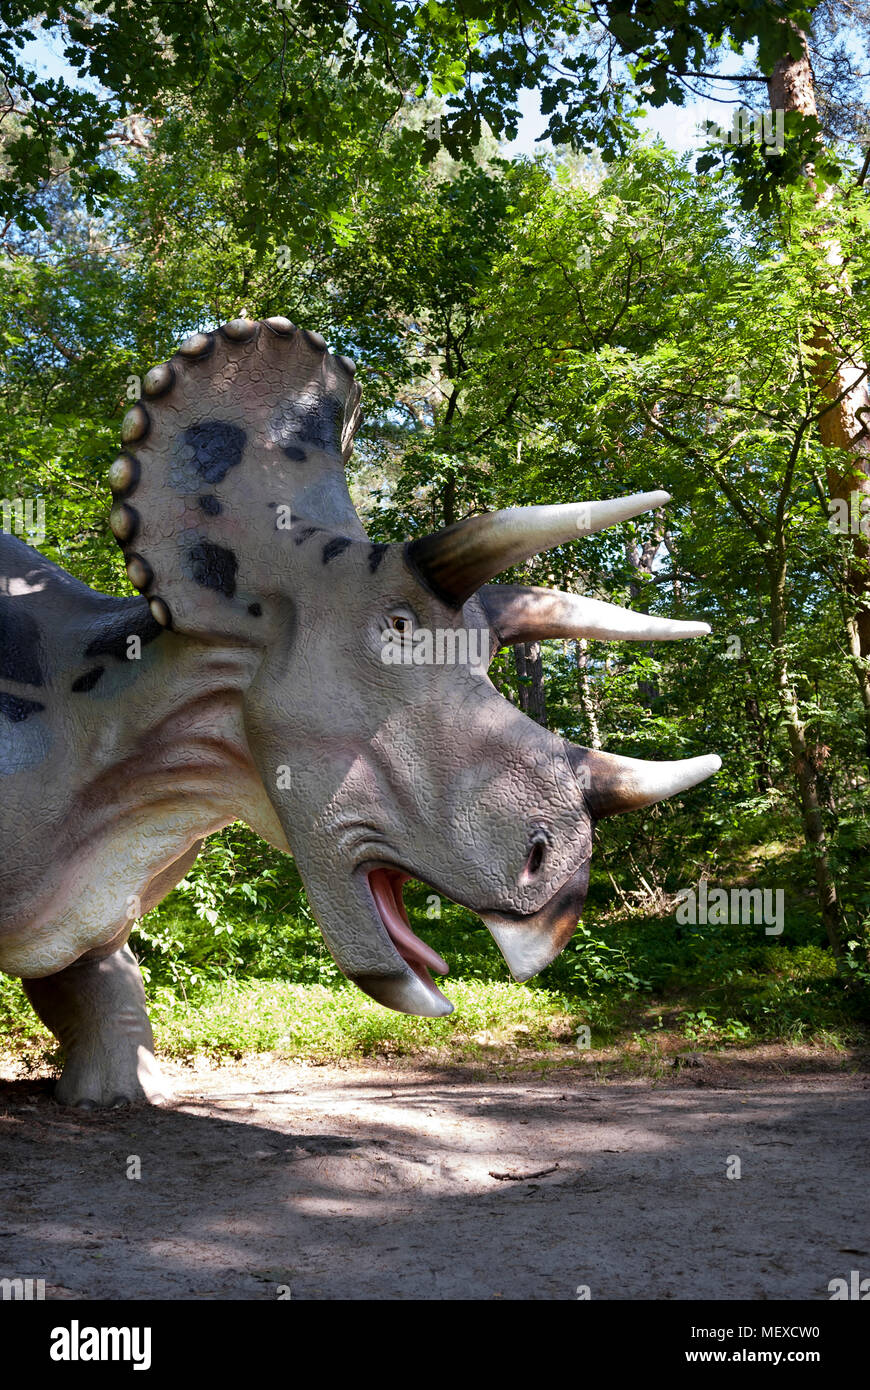 Sculpture of dinosaur (triceratops) in live size. Stock Photo